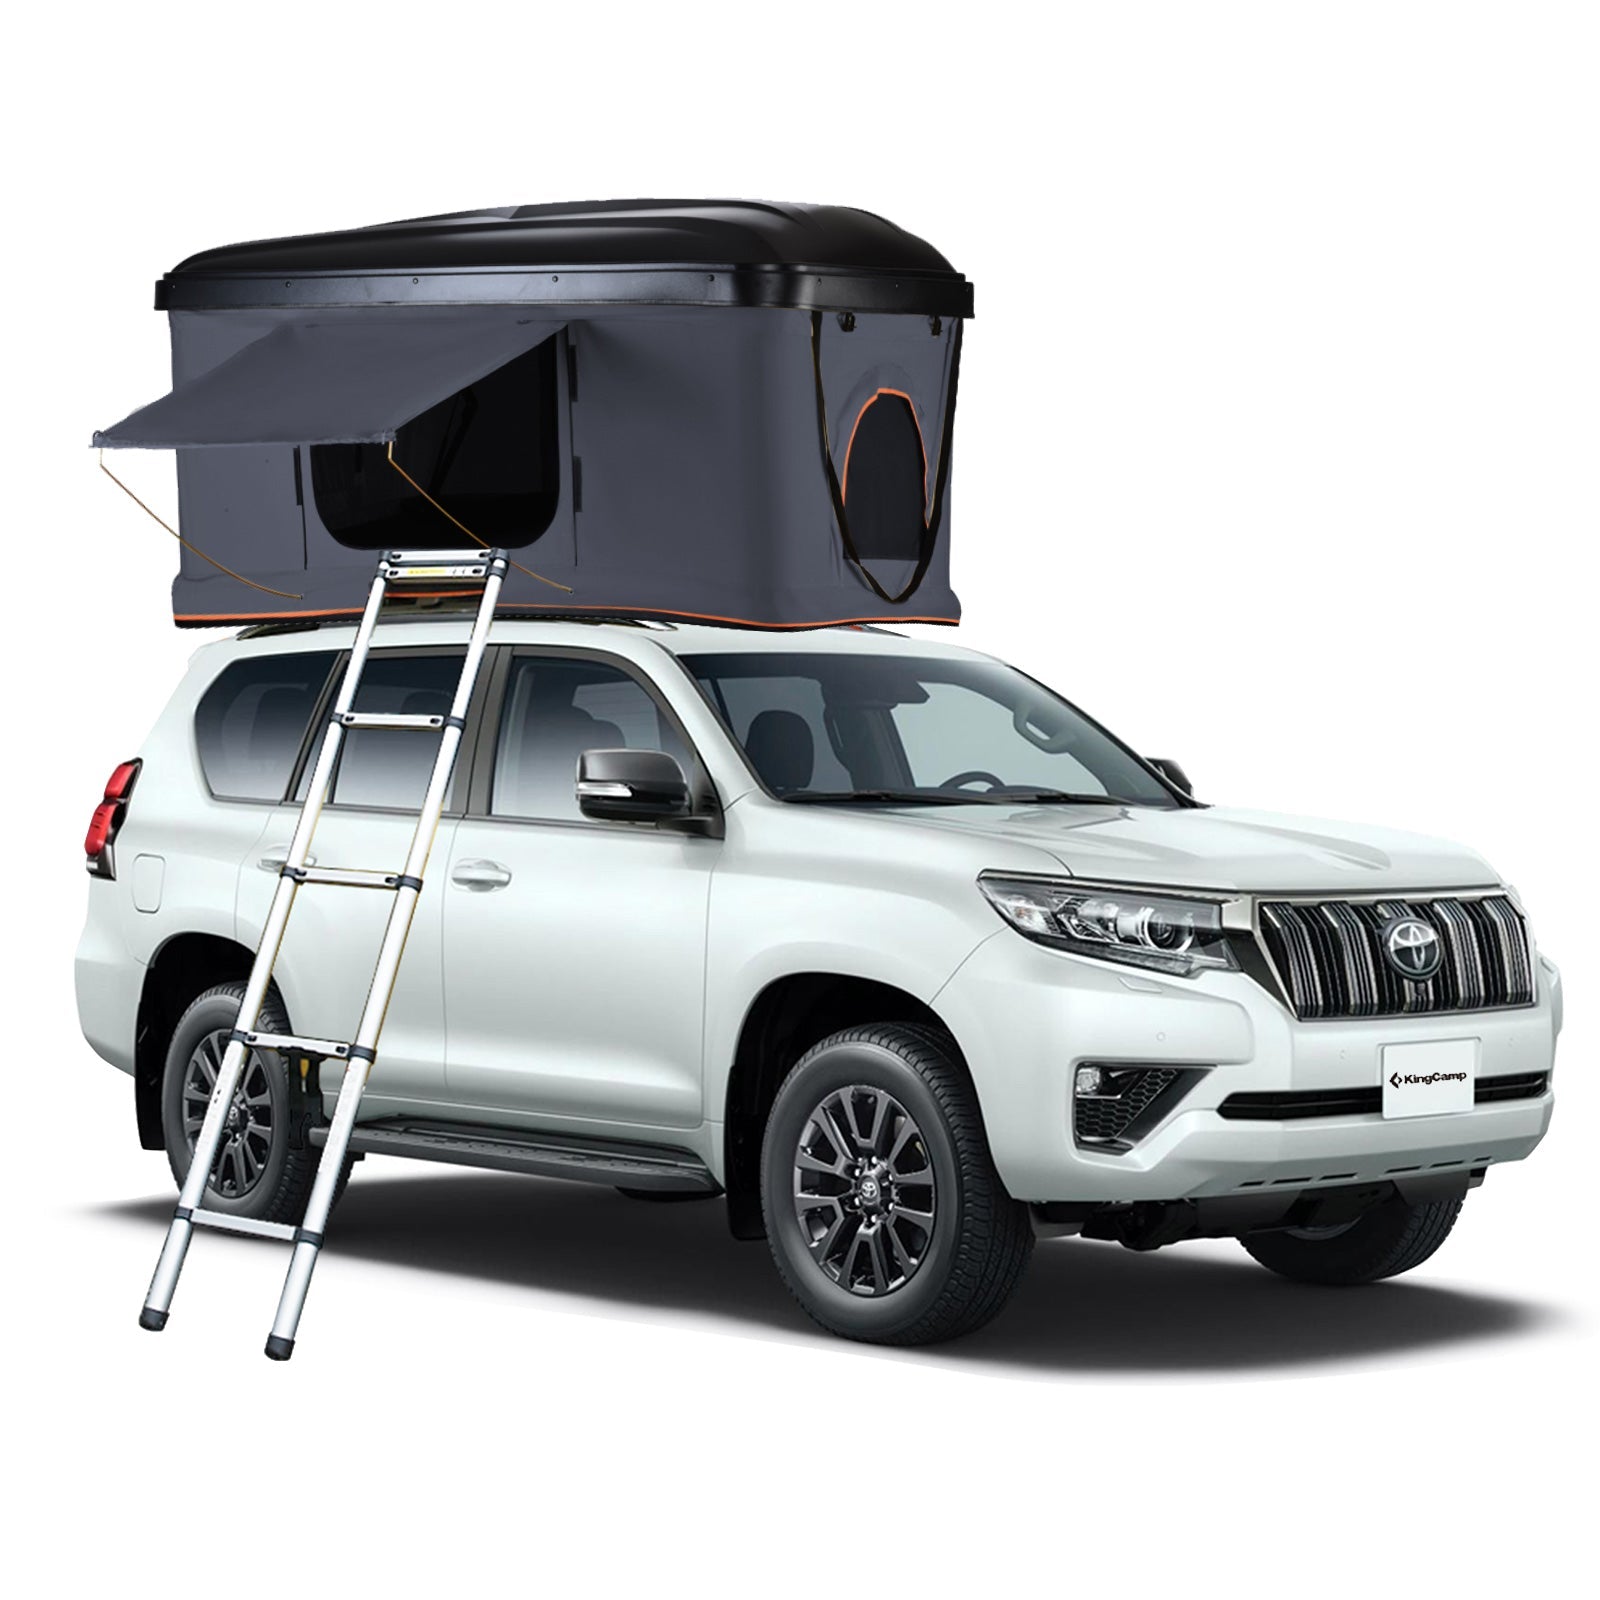 KingCamp 2-Person Rooftop Tent